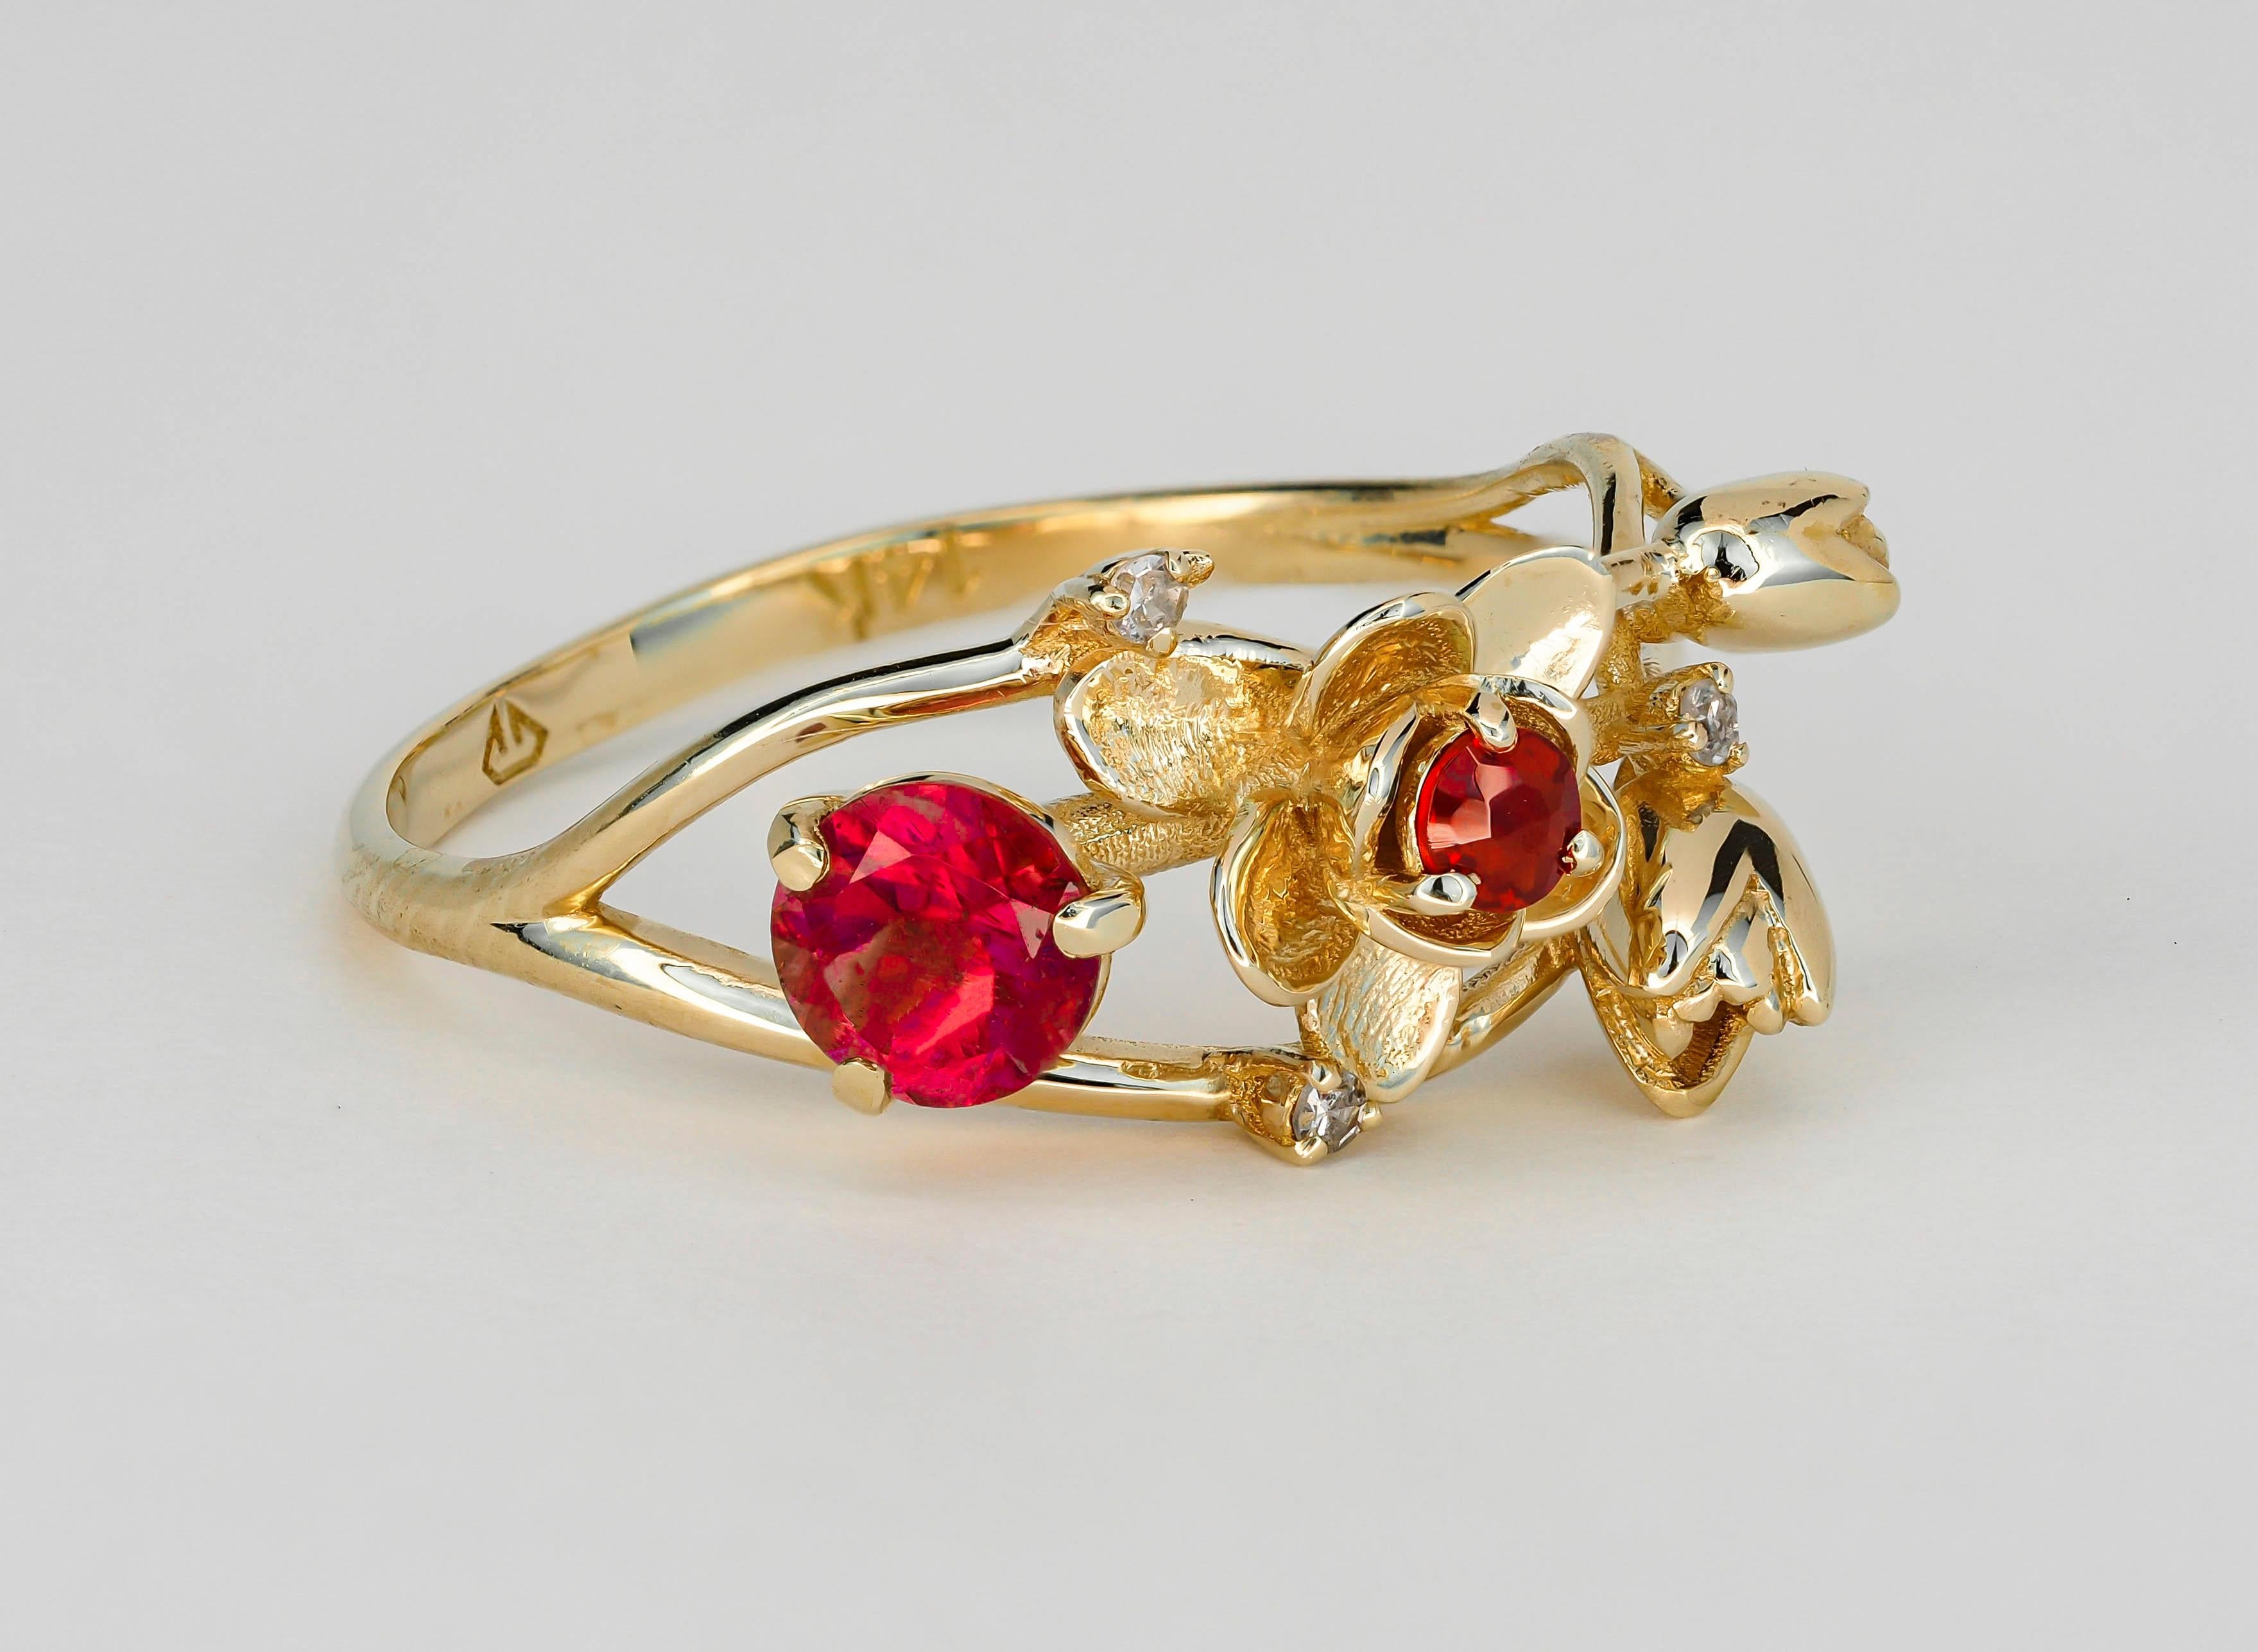 For Sale:  Ruby ring. 14k Gold Ring with Ruby, Garnet and Diamonds. Orchid Flower Ring. 2